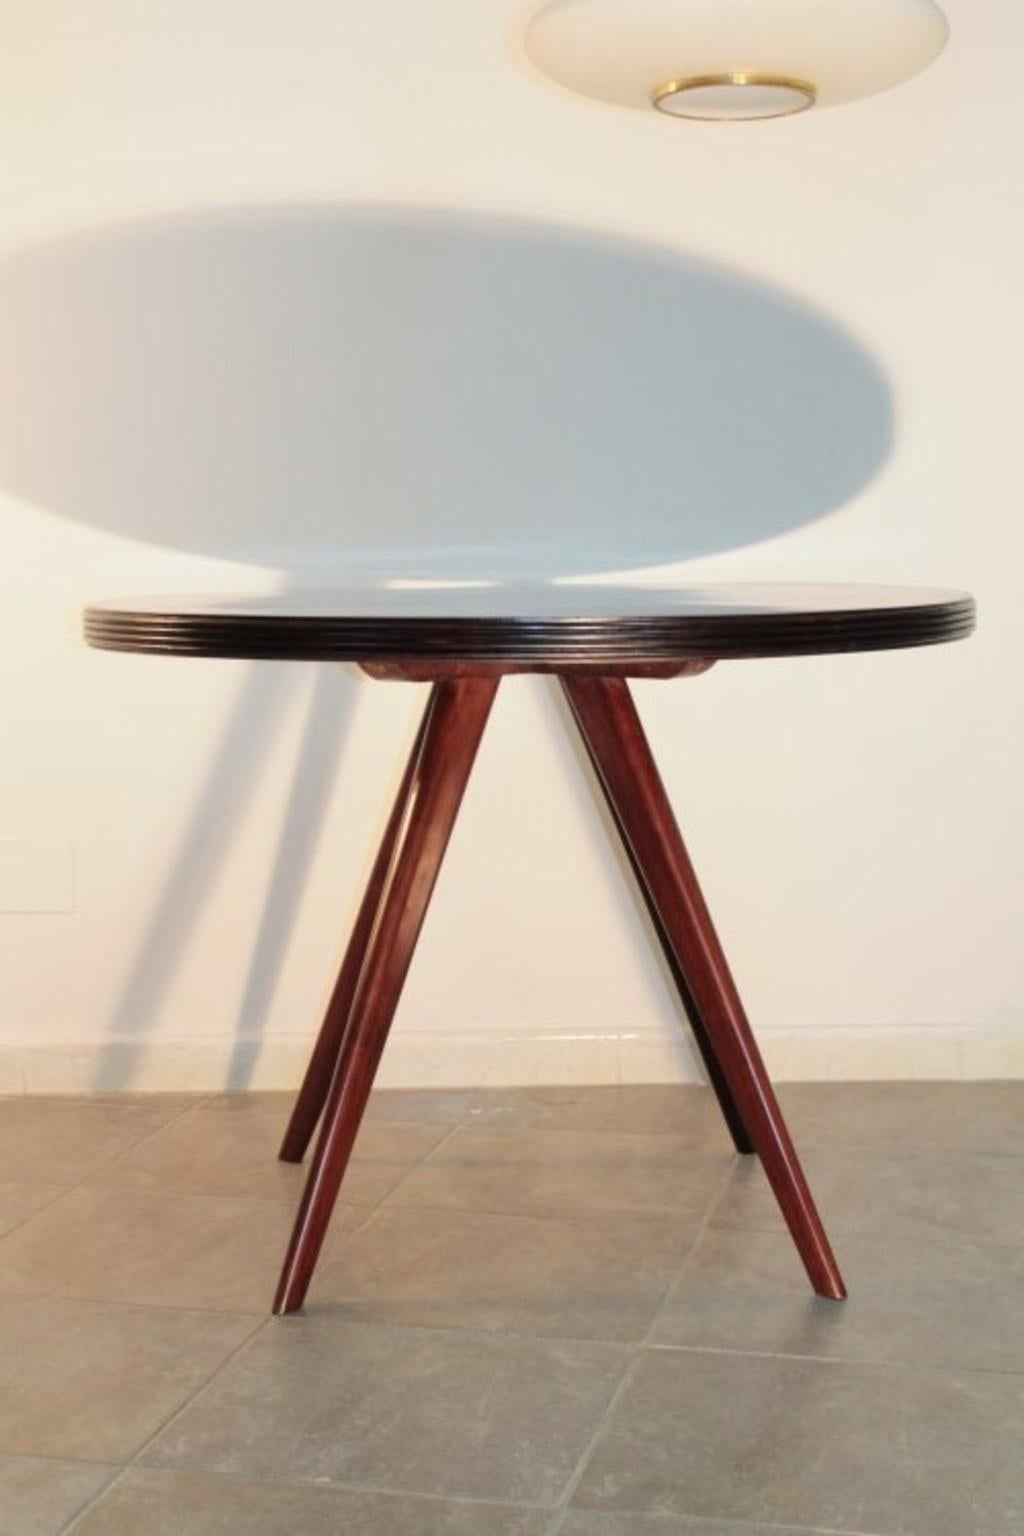 Mid-Century Modern Round Dining Table 1950s Ico Parisi Rosewood